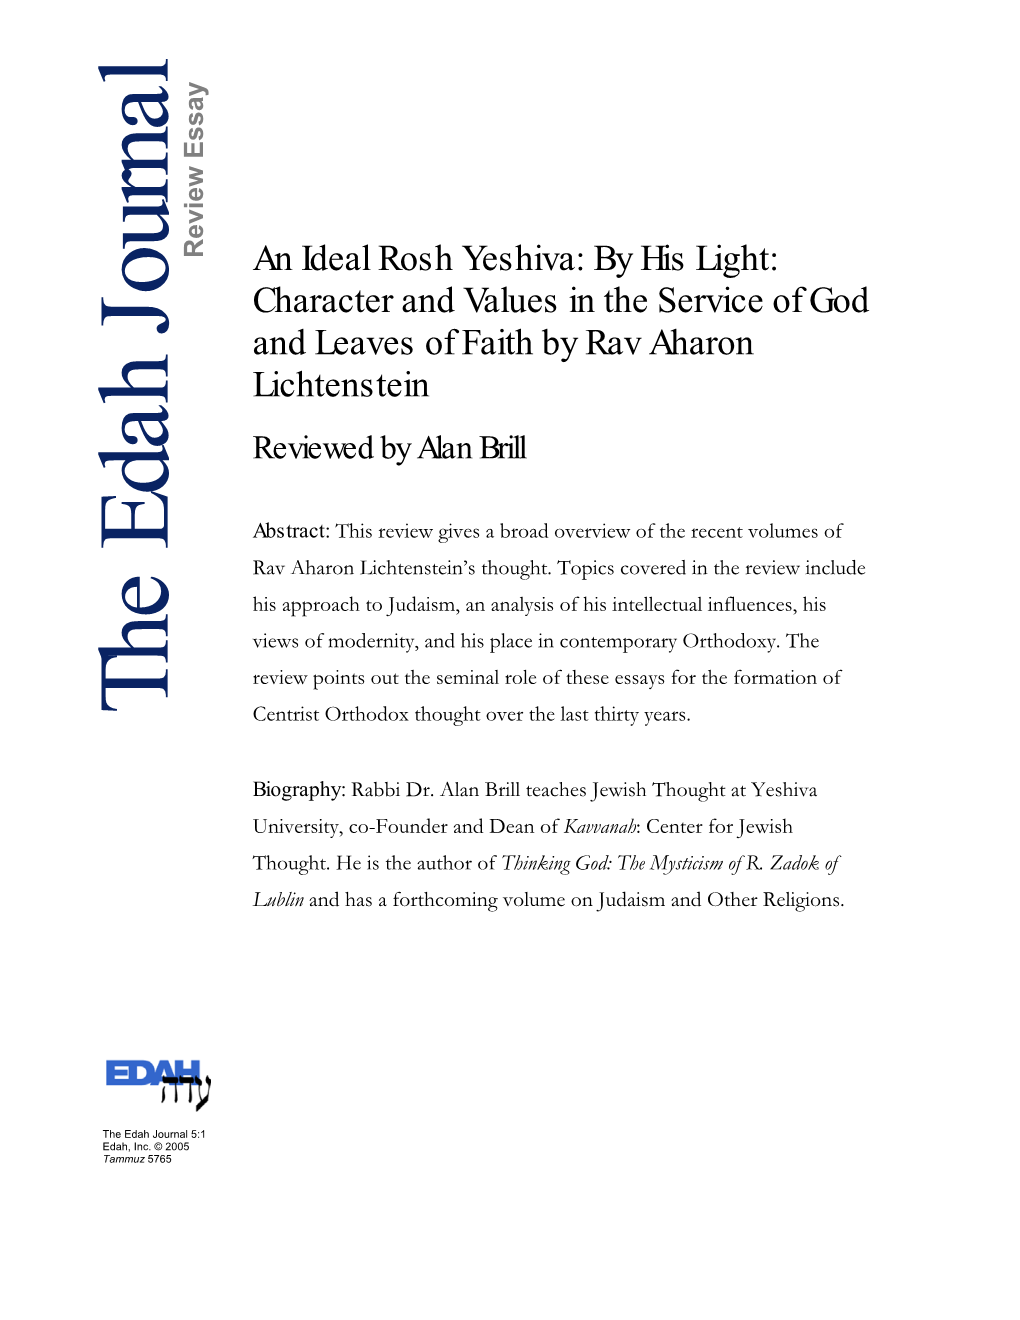 An Ideal Rosh Yeshiva: by His Light